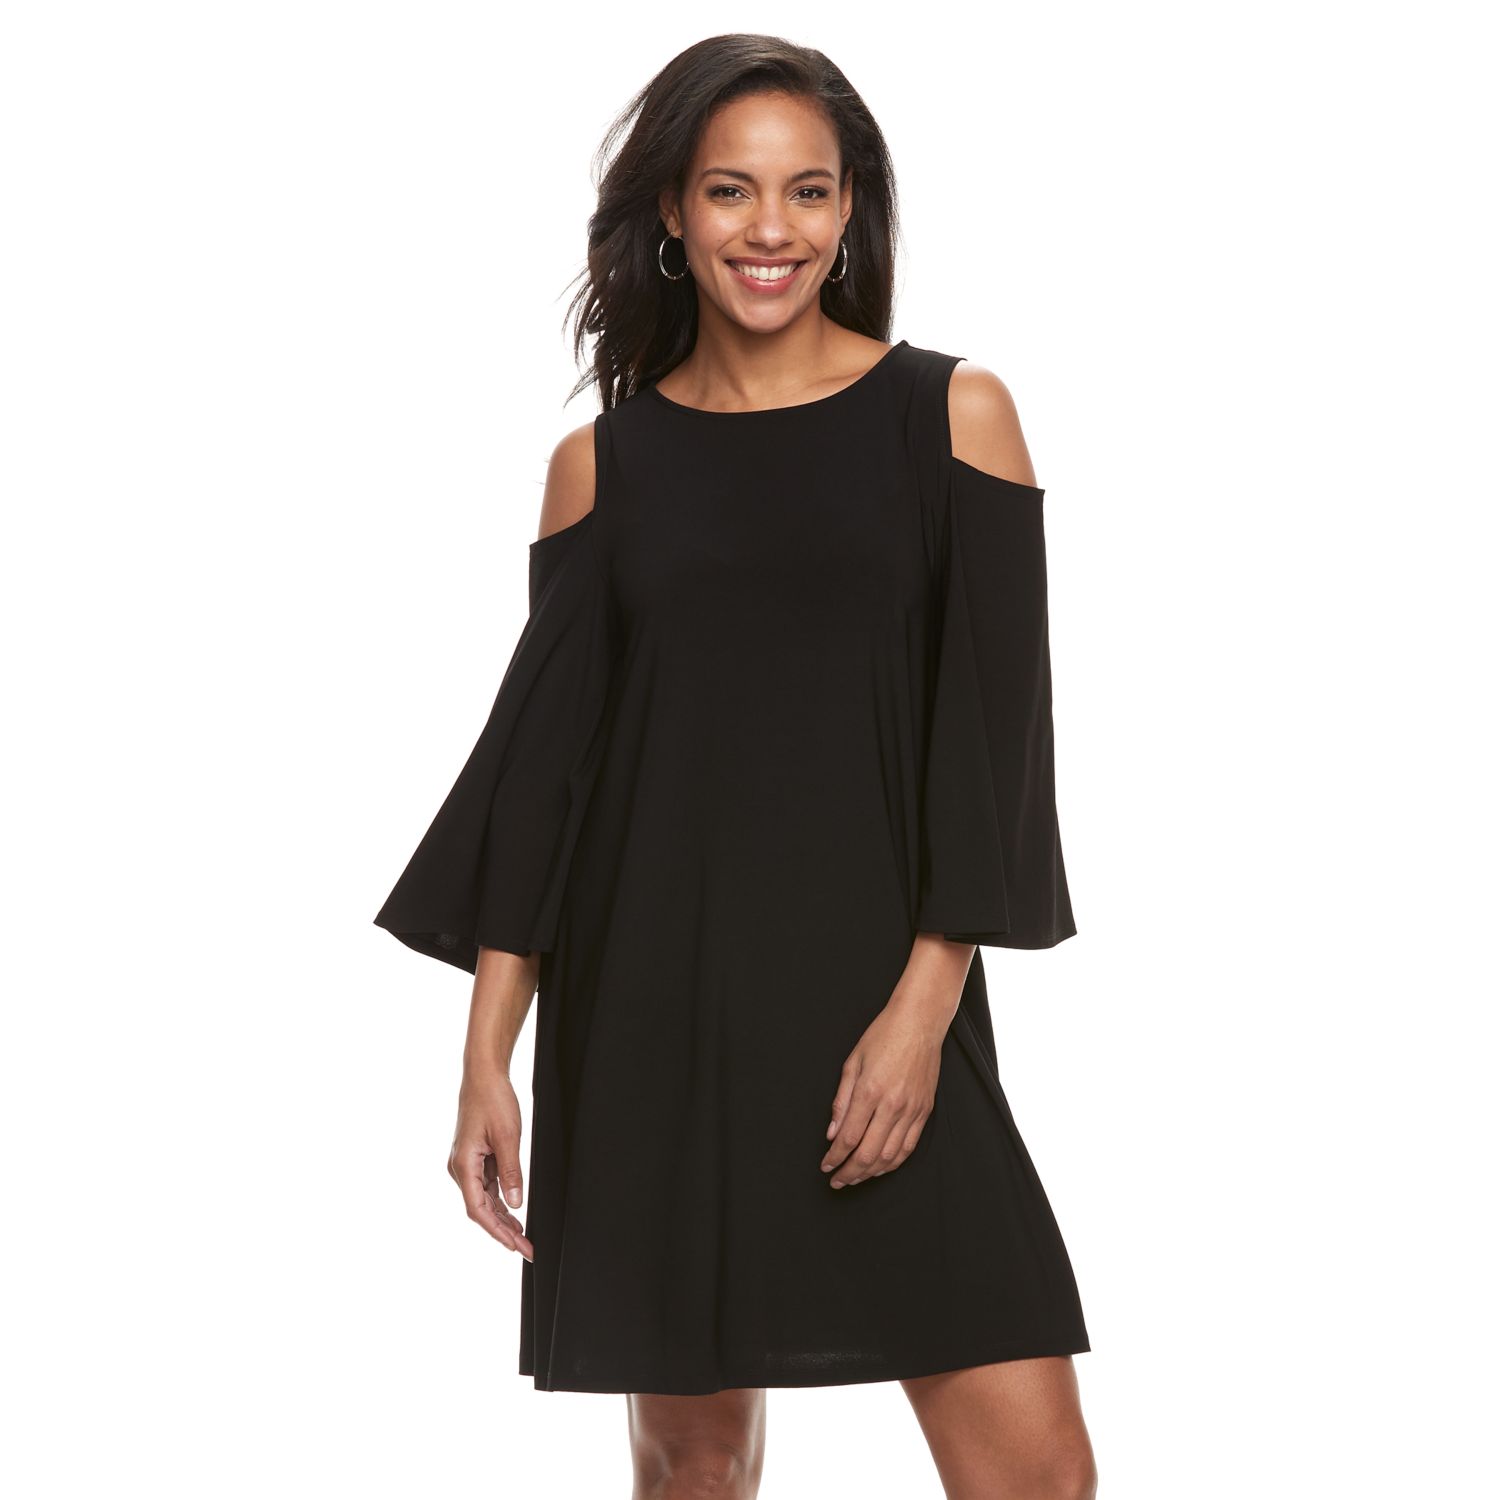 Women's Black Cocktail Dresses for Any ...